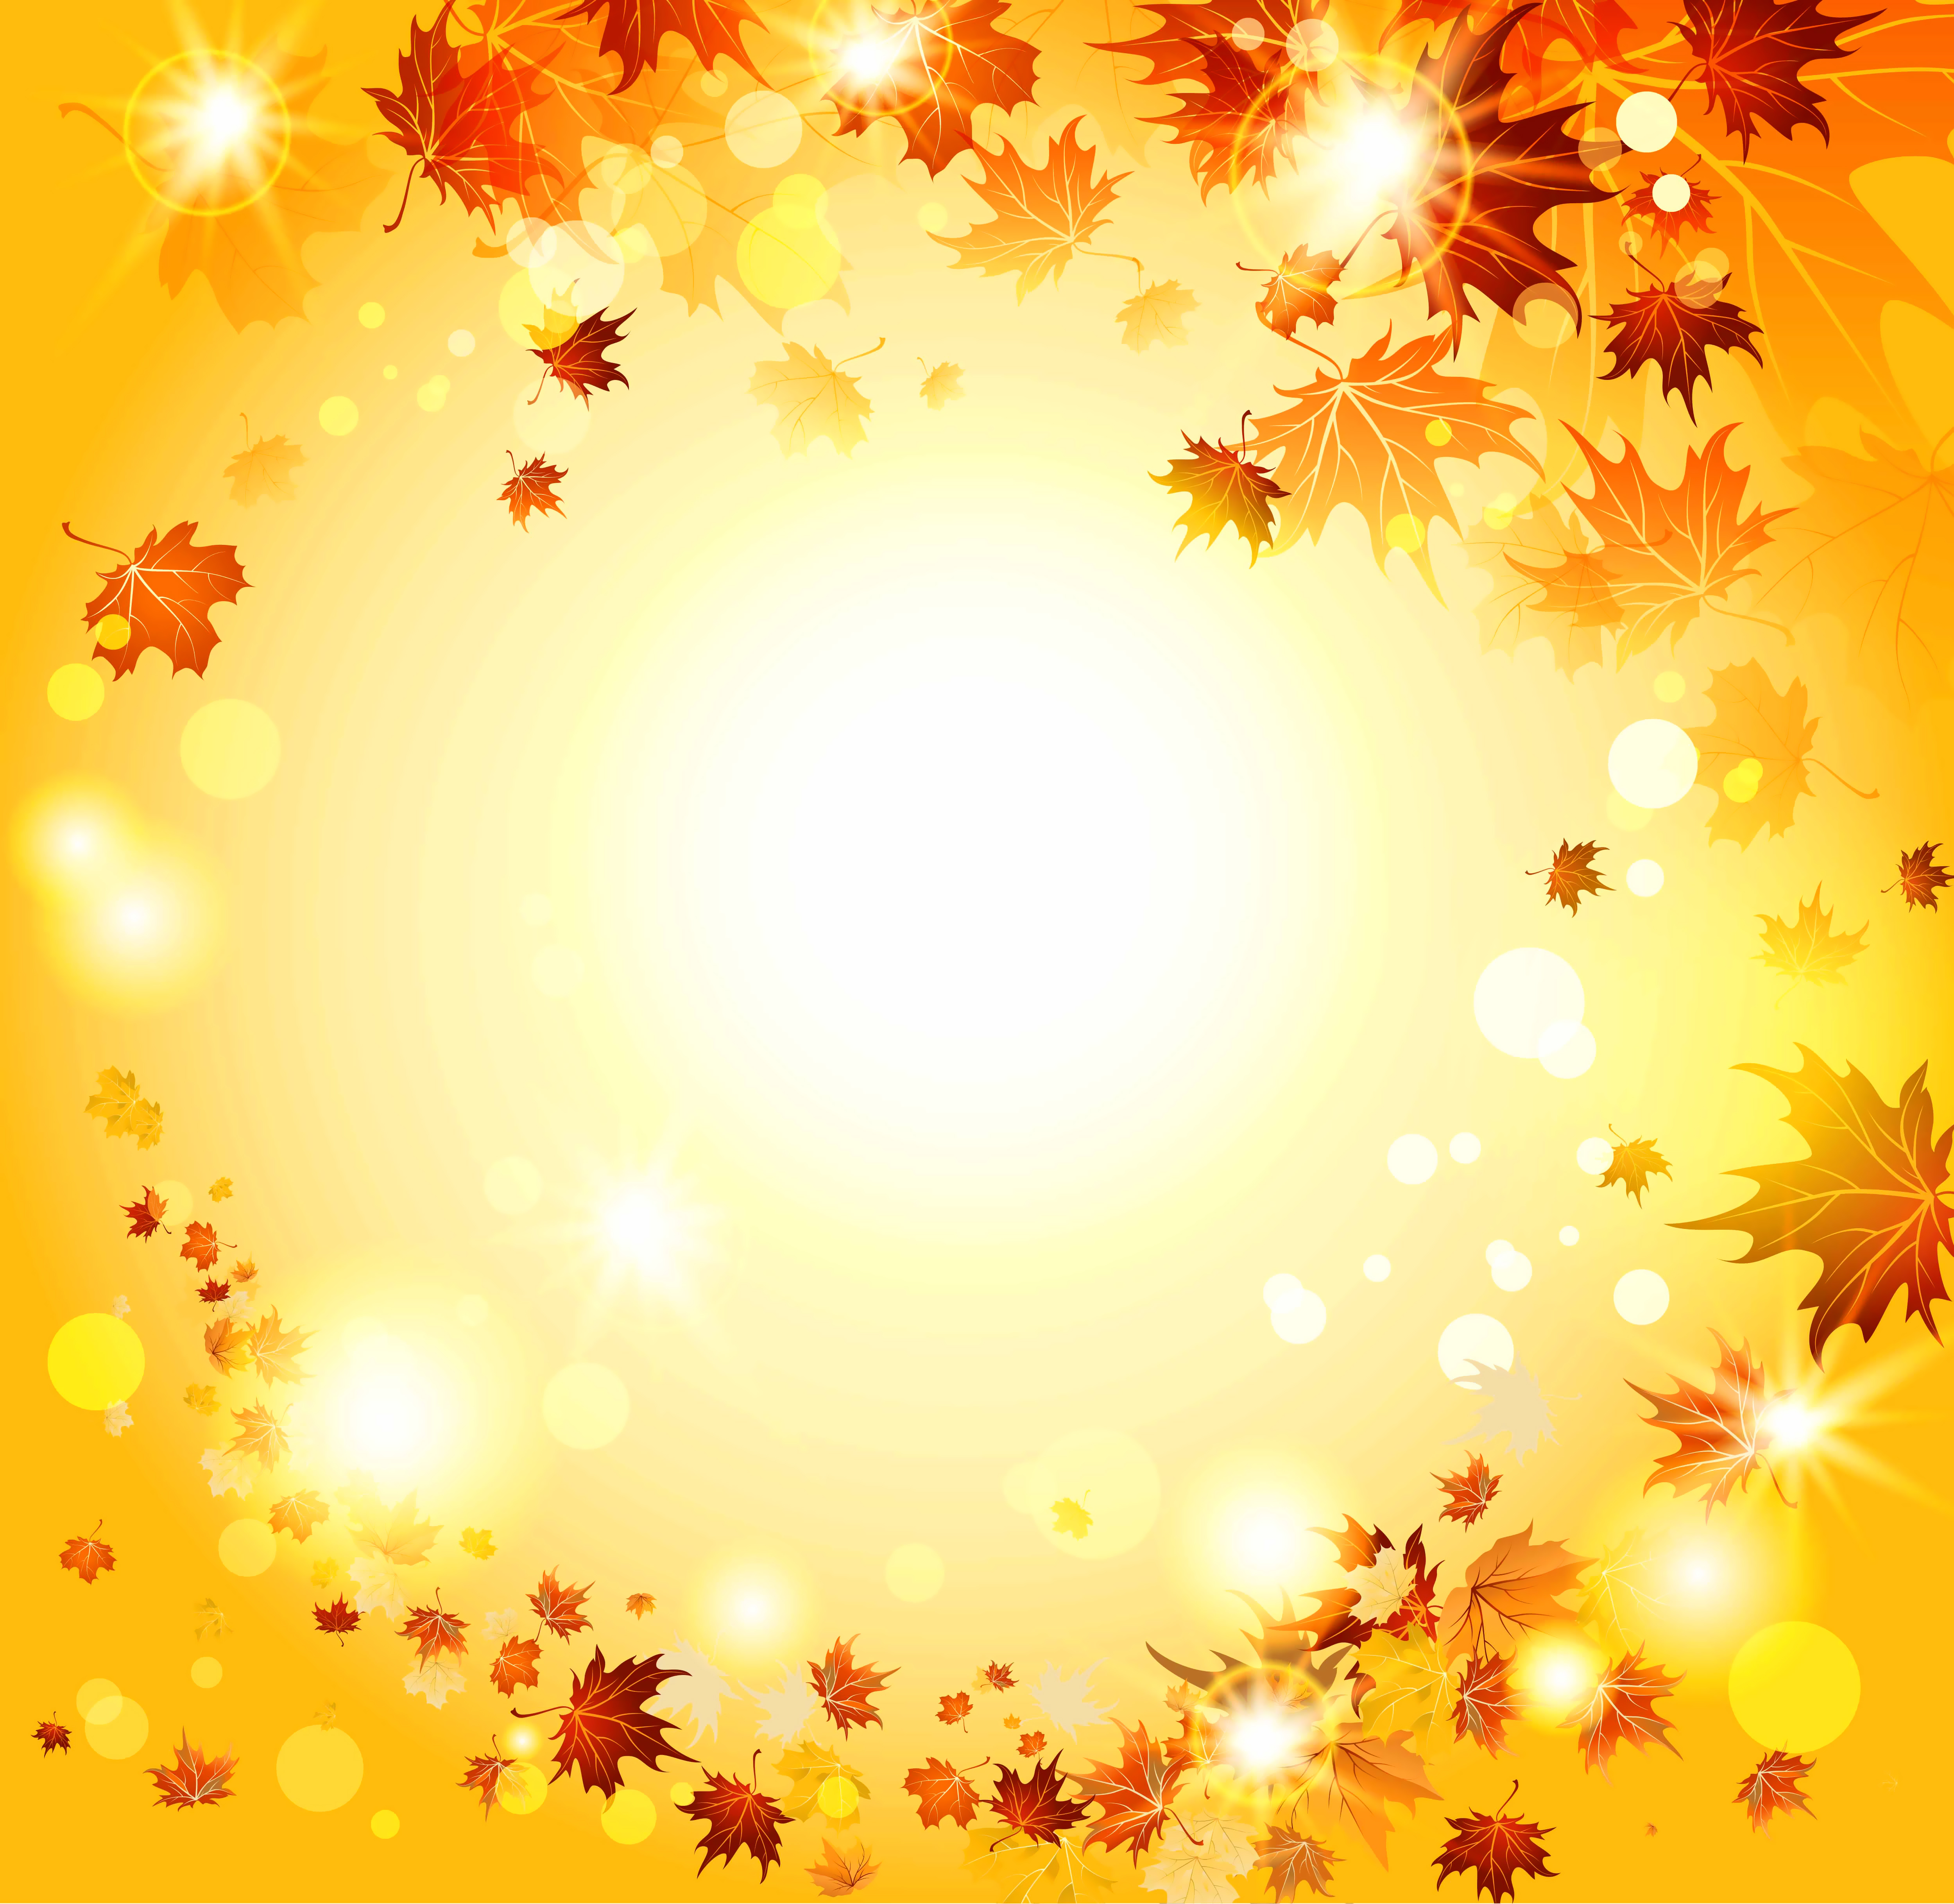 Fall Background with Leaves.